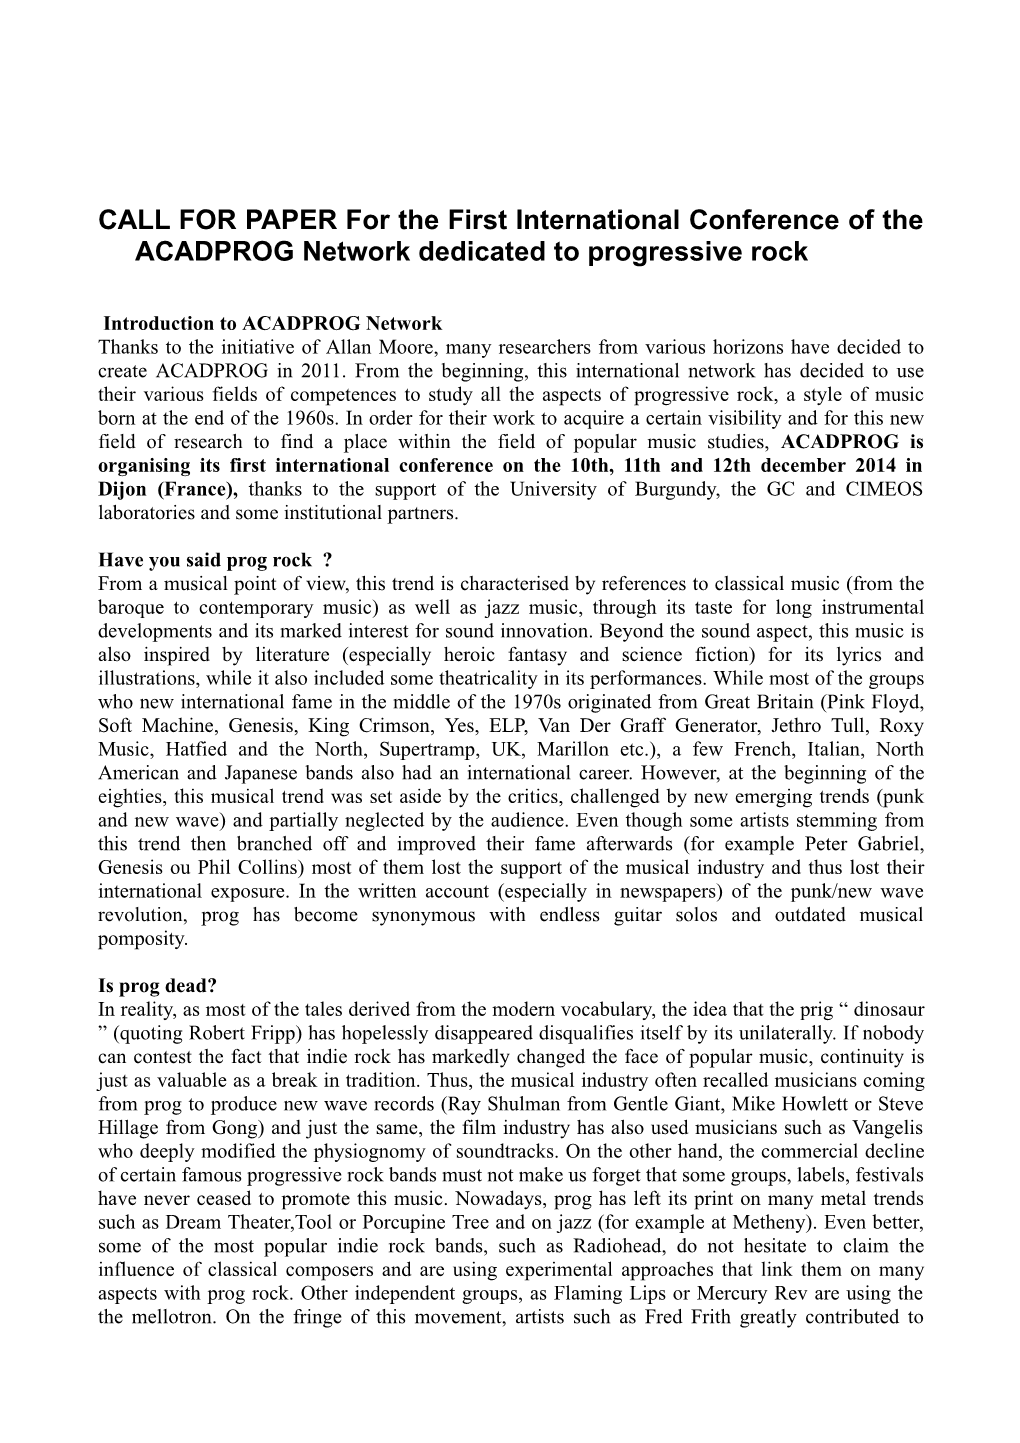 First International Conference of the ACADPROG Network Dedicated to Progressive Rock